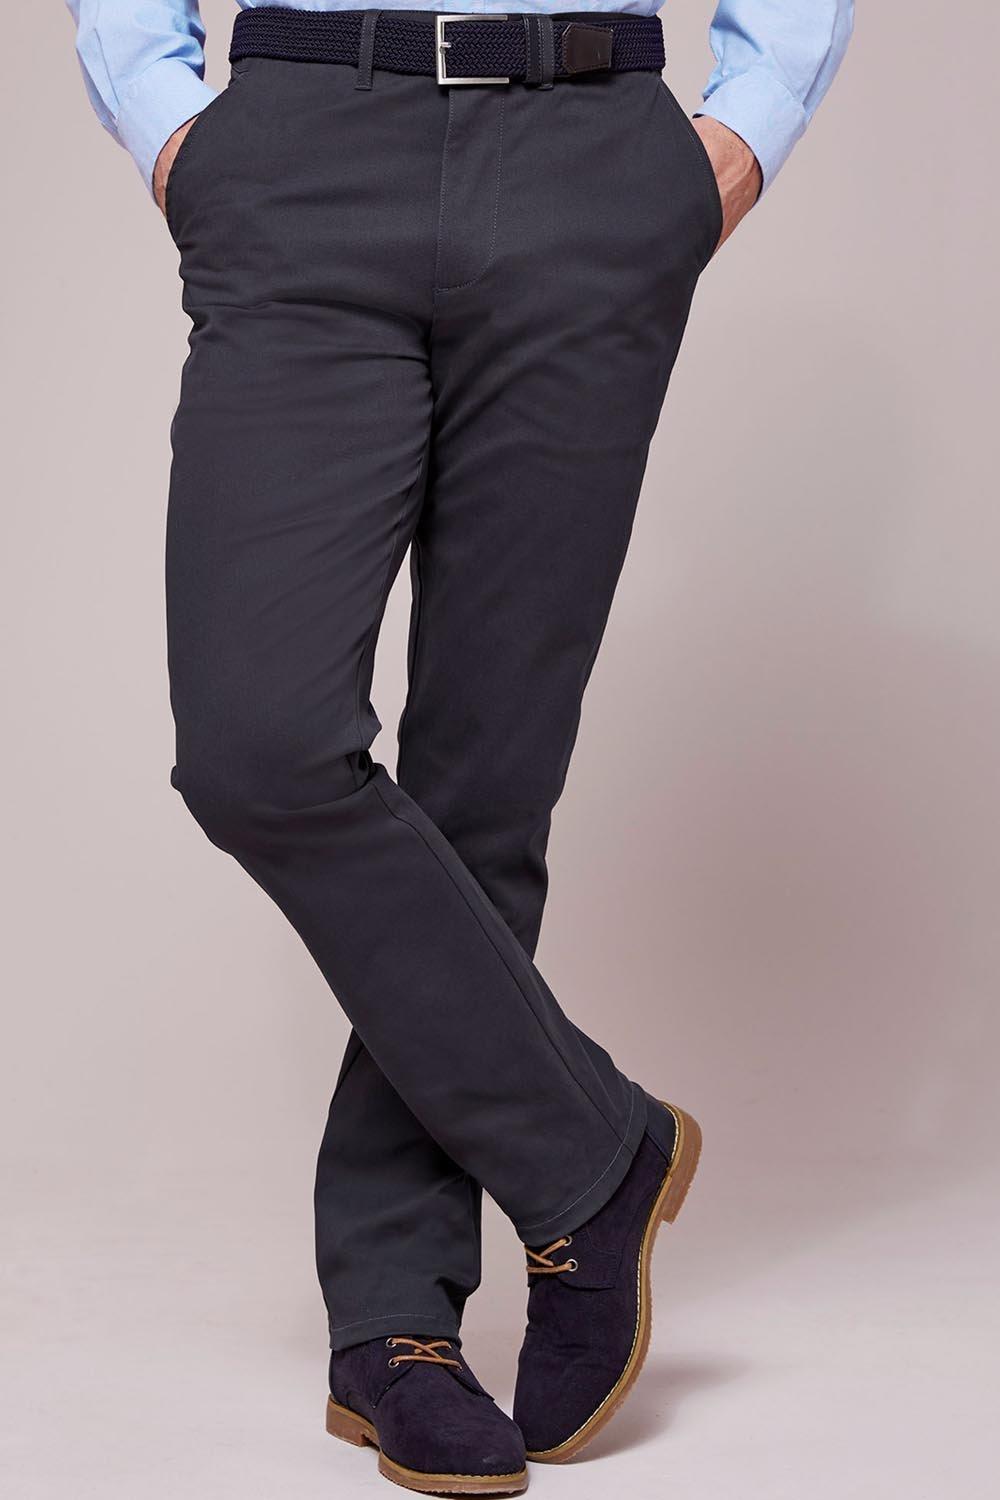 Should Chinos Have a Crease Down the Front? | Tapered Menswear